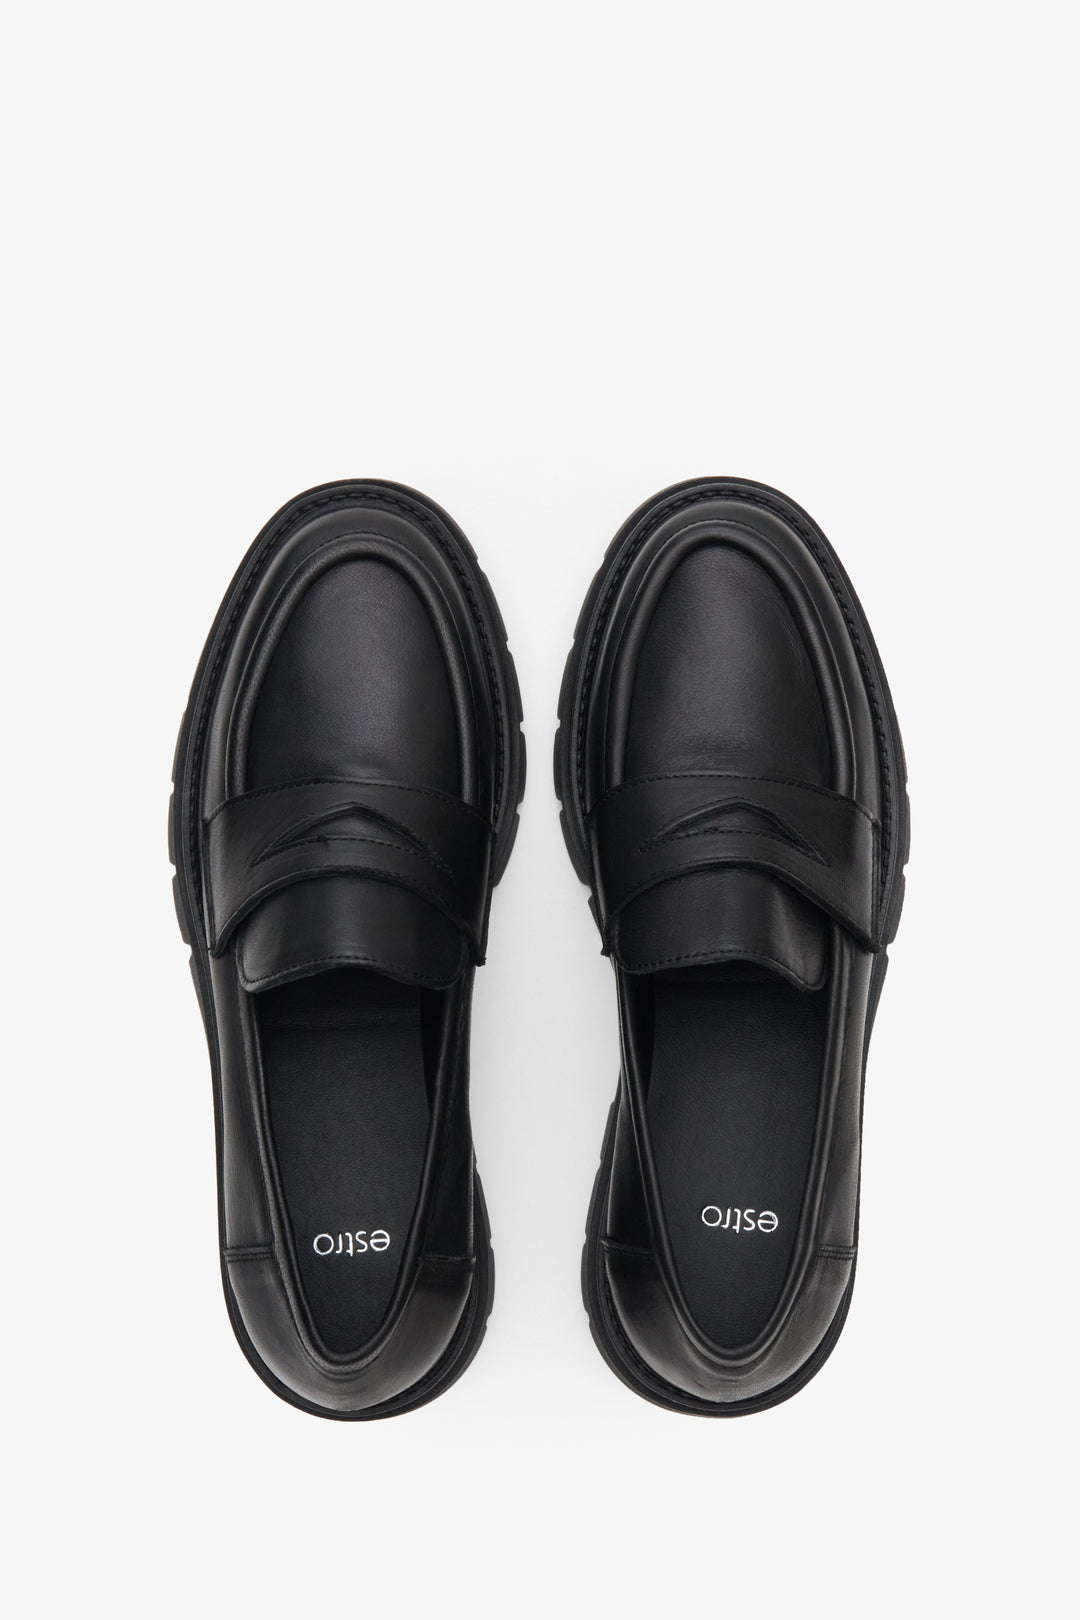 Women's black leather loafers by Estro - top view presentation of the footwear.